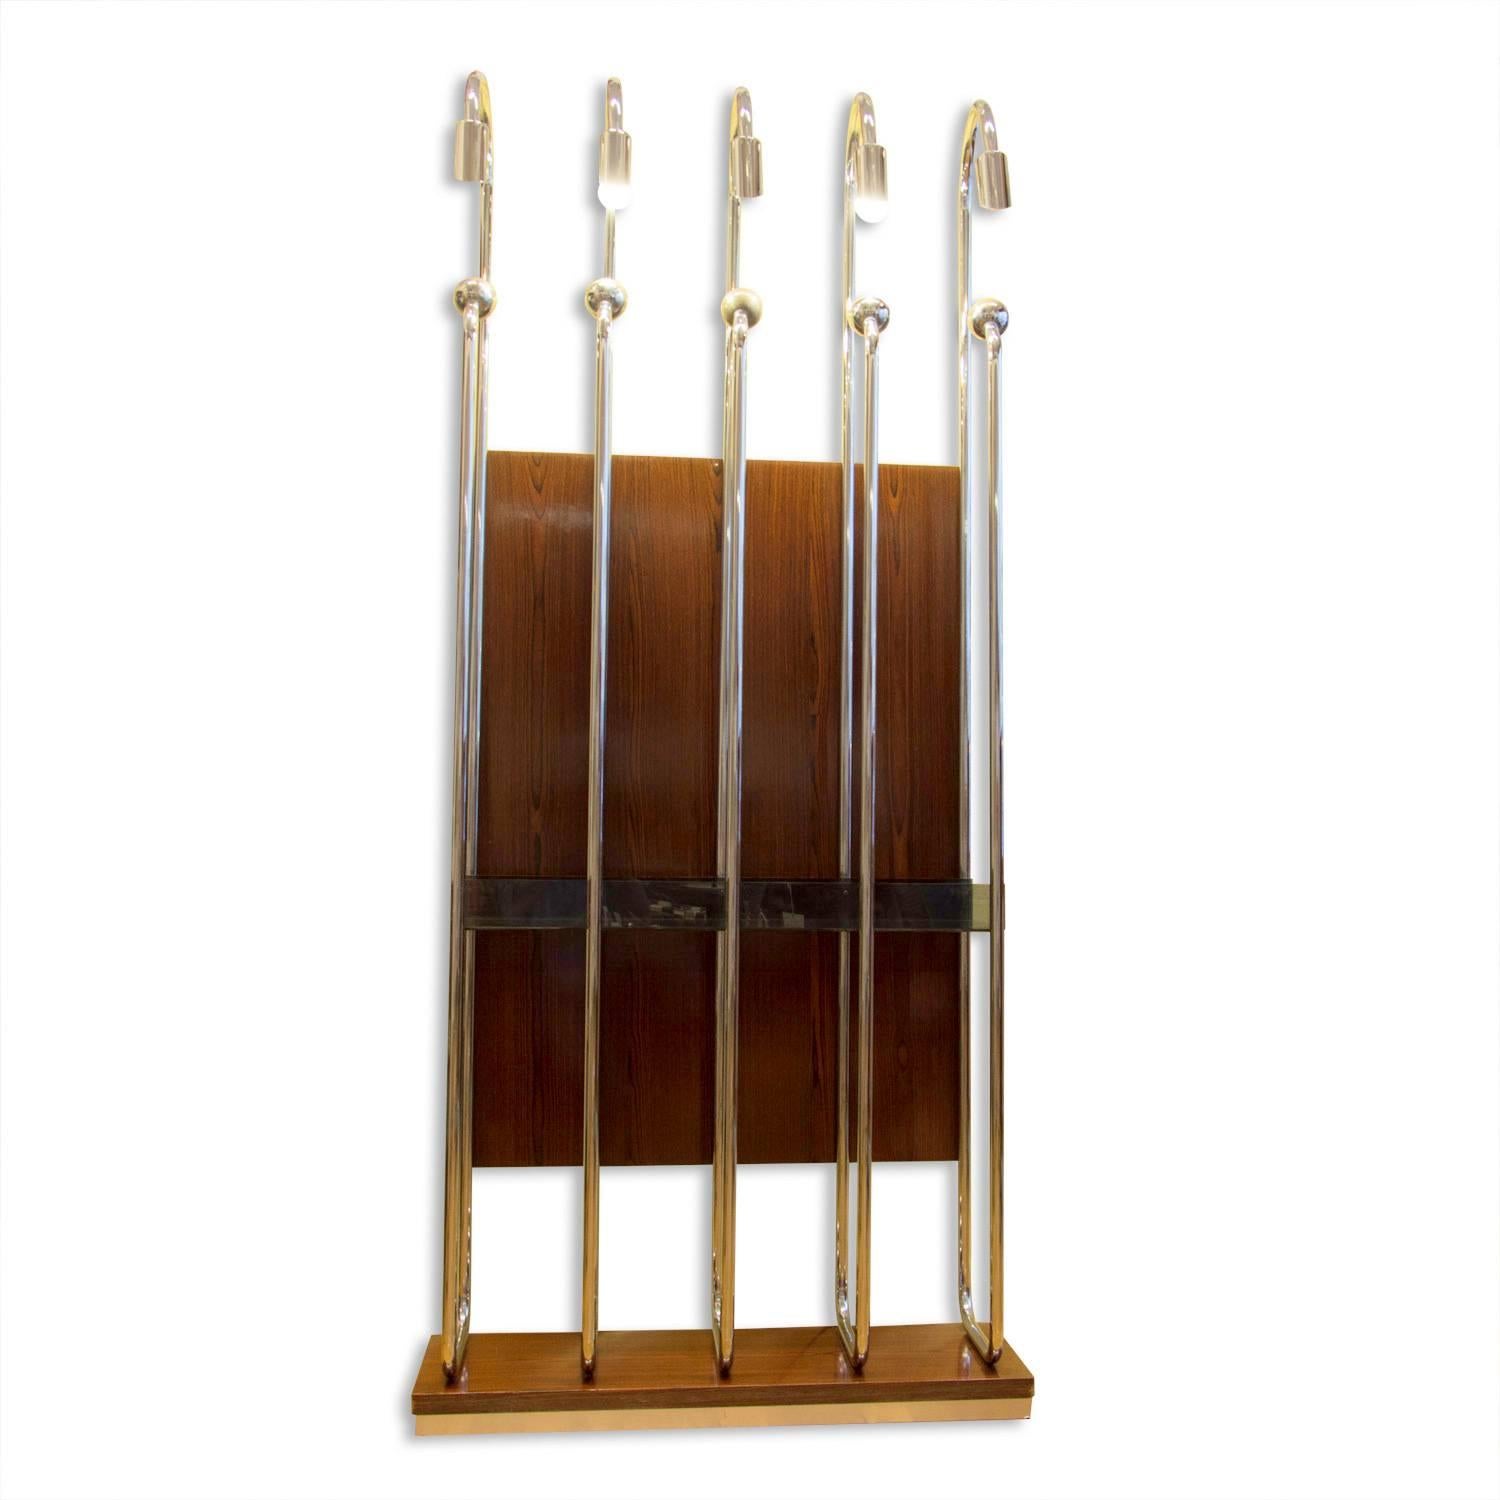 This Italian entrance or hall coat rack was produced in Italy in the 1970s. It features five chrome-plated hangers which are illuminated by five lights from the top. Also, it features wood veneered parts and one shelf in the middle of the rack.